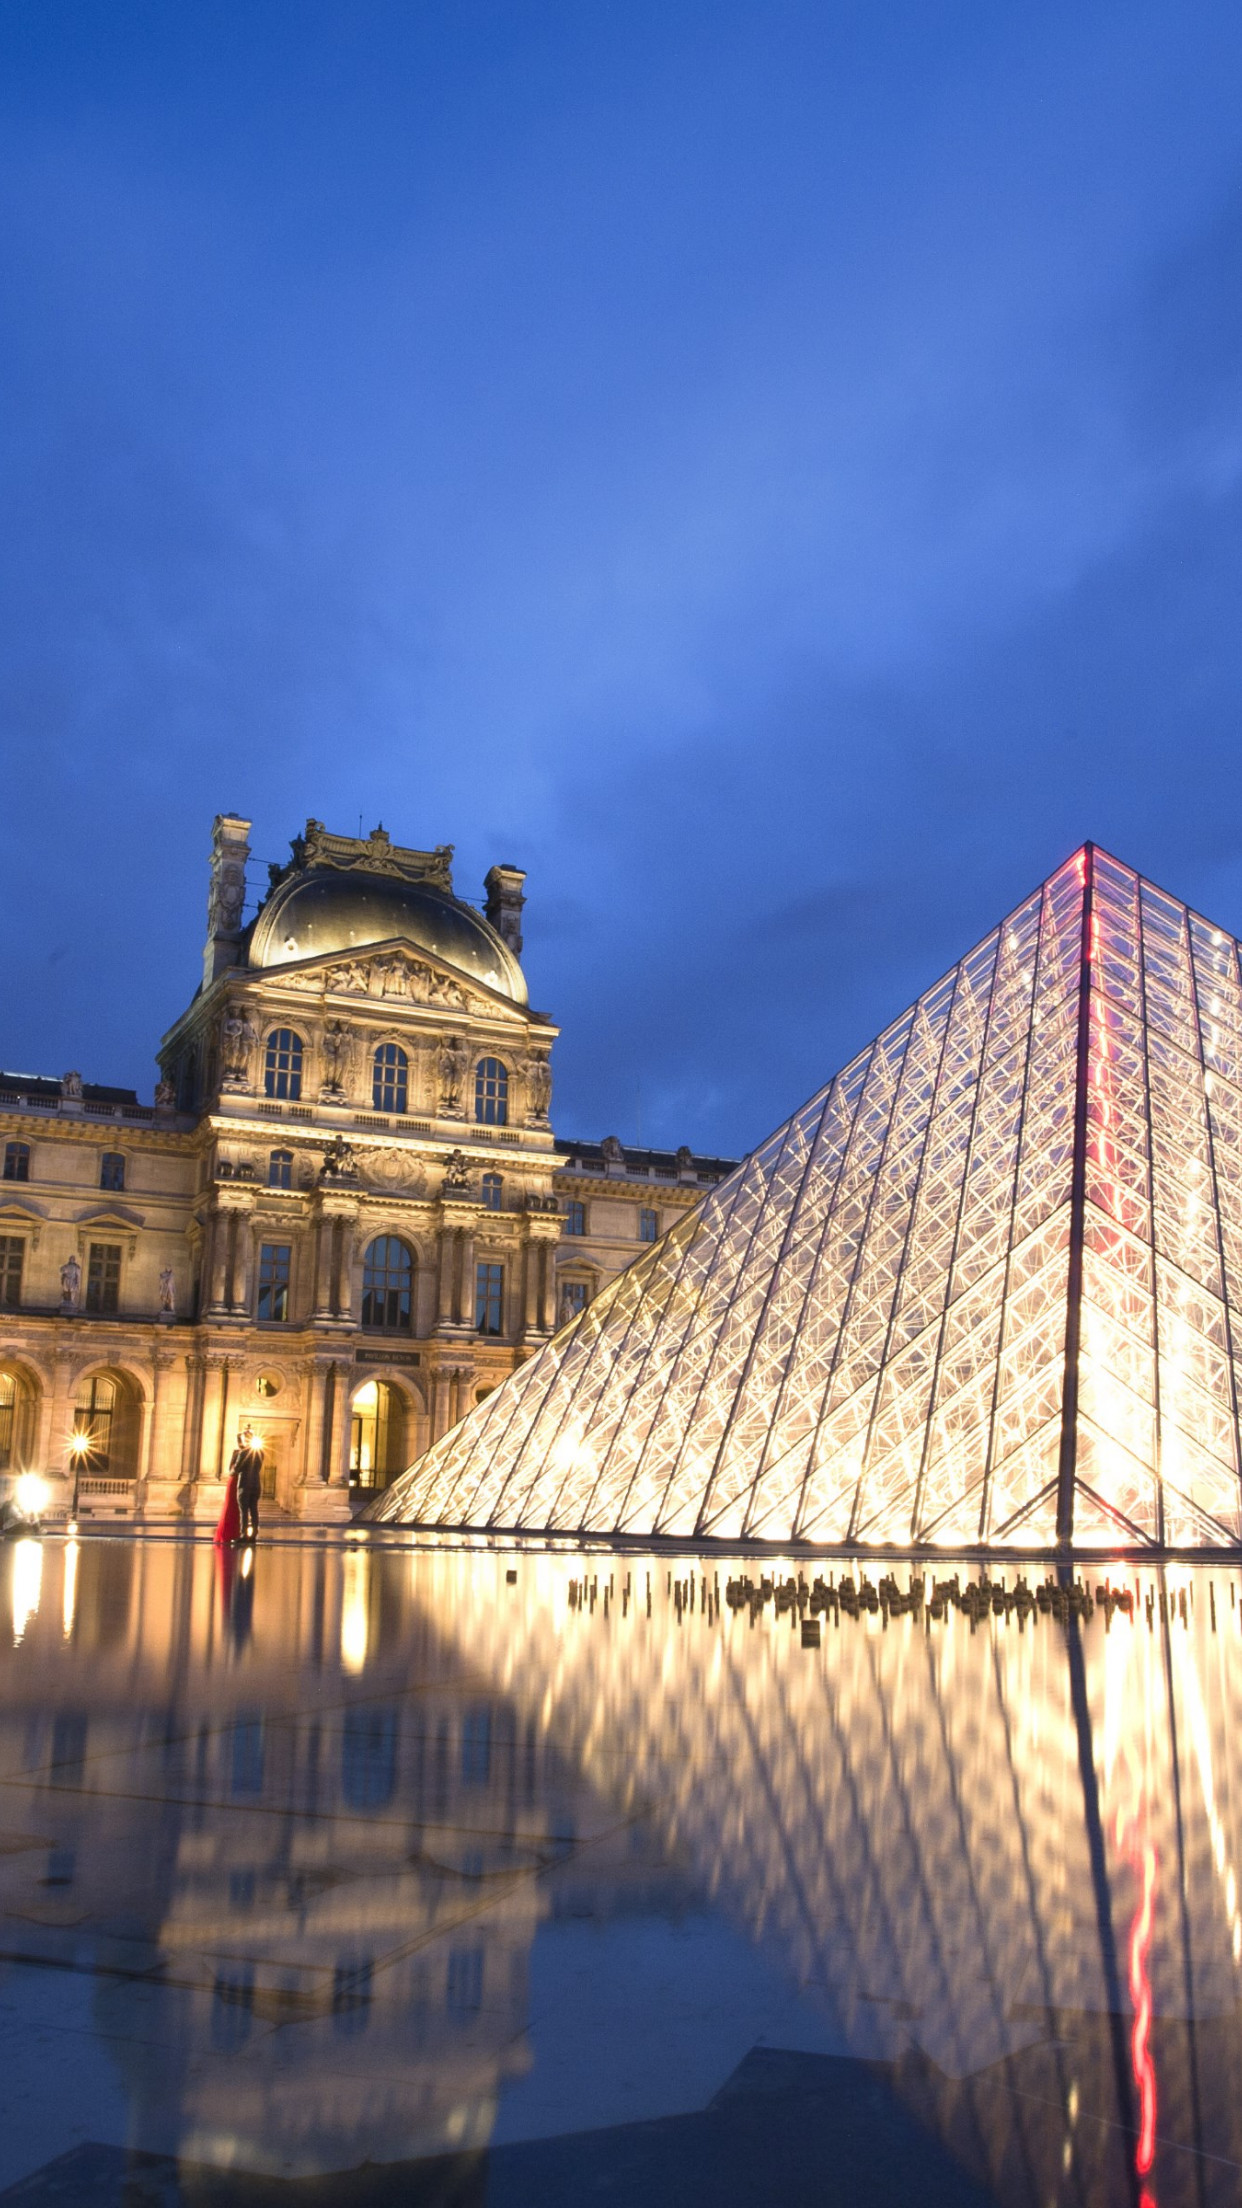 Download wallpaper: Louvre pyramid and museum 1242x2208